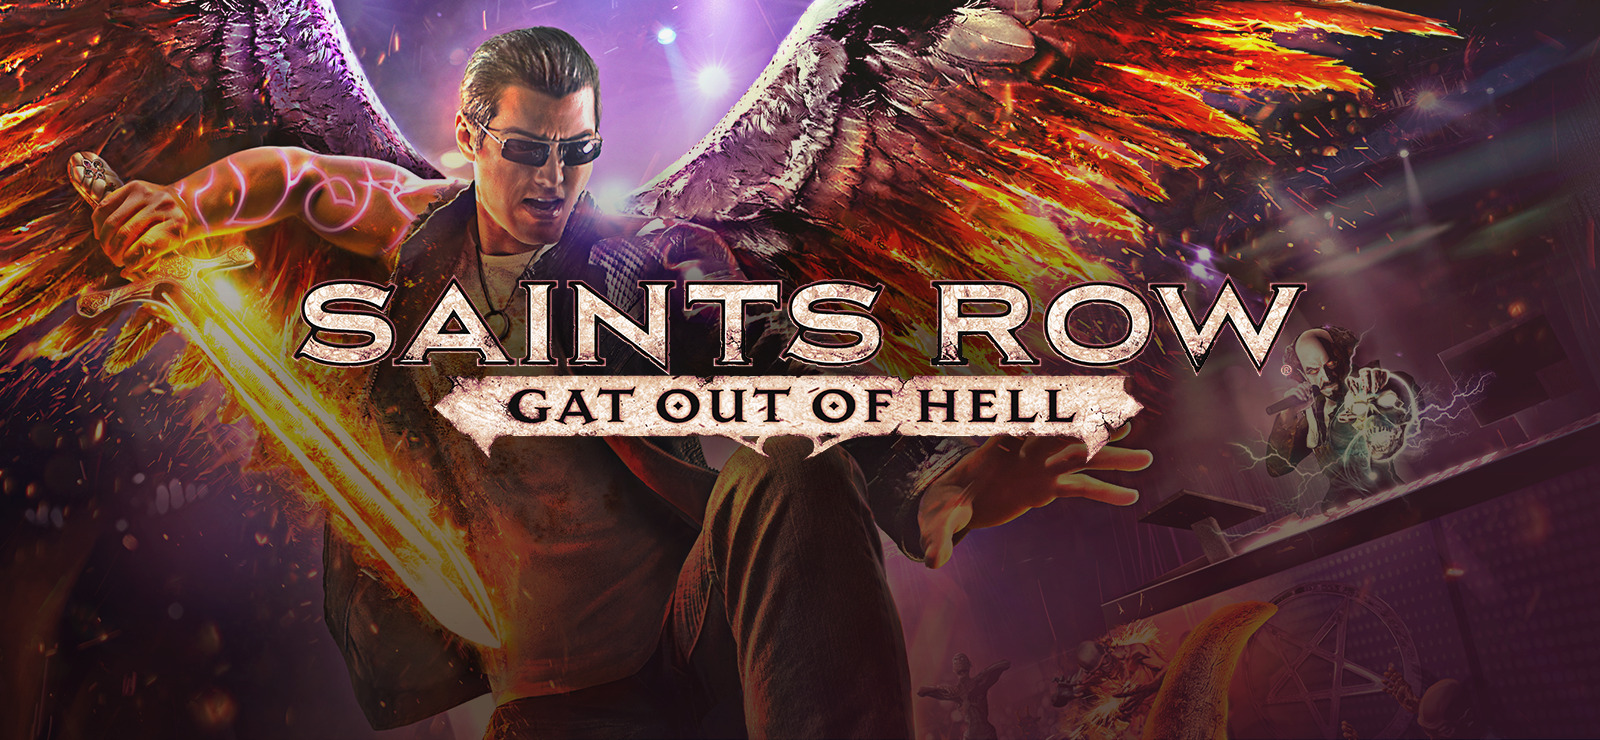 Gat out of hell стим фото 21